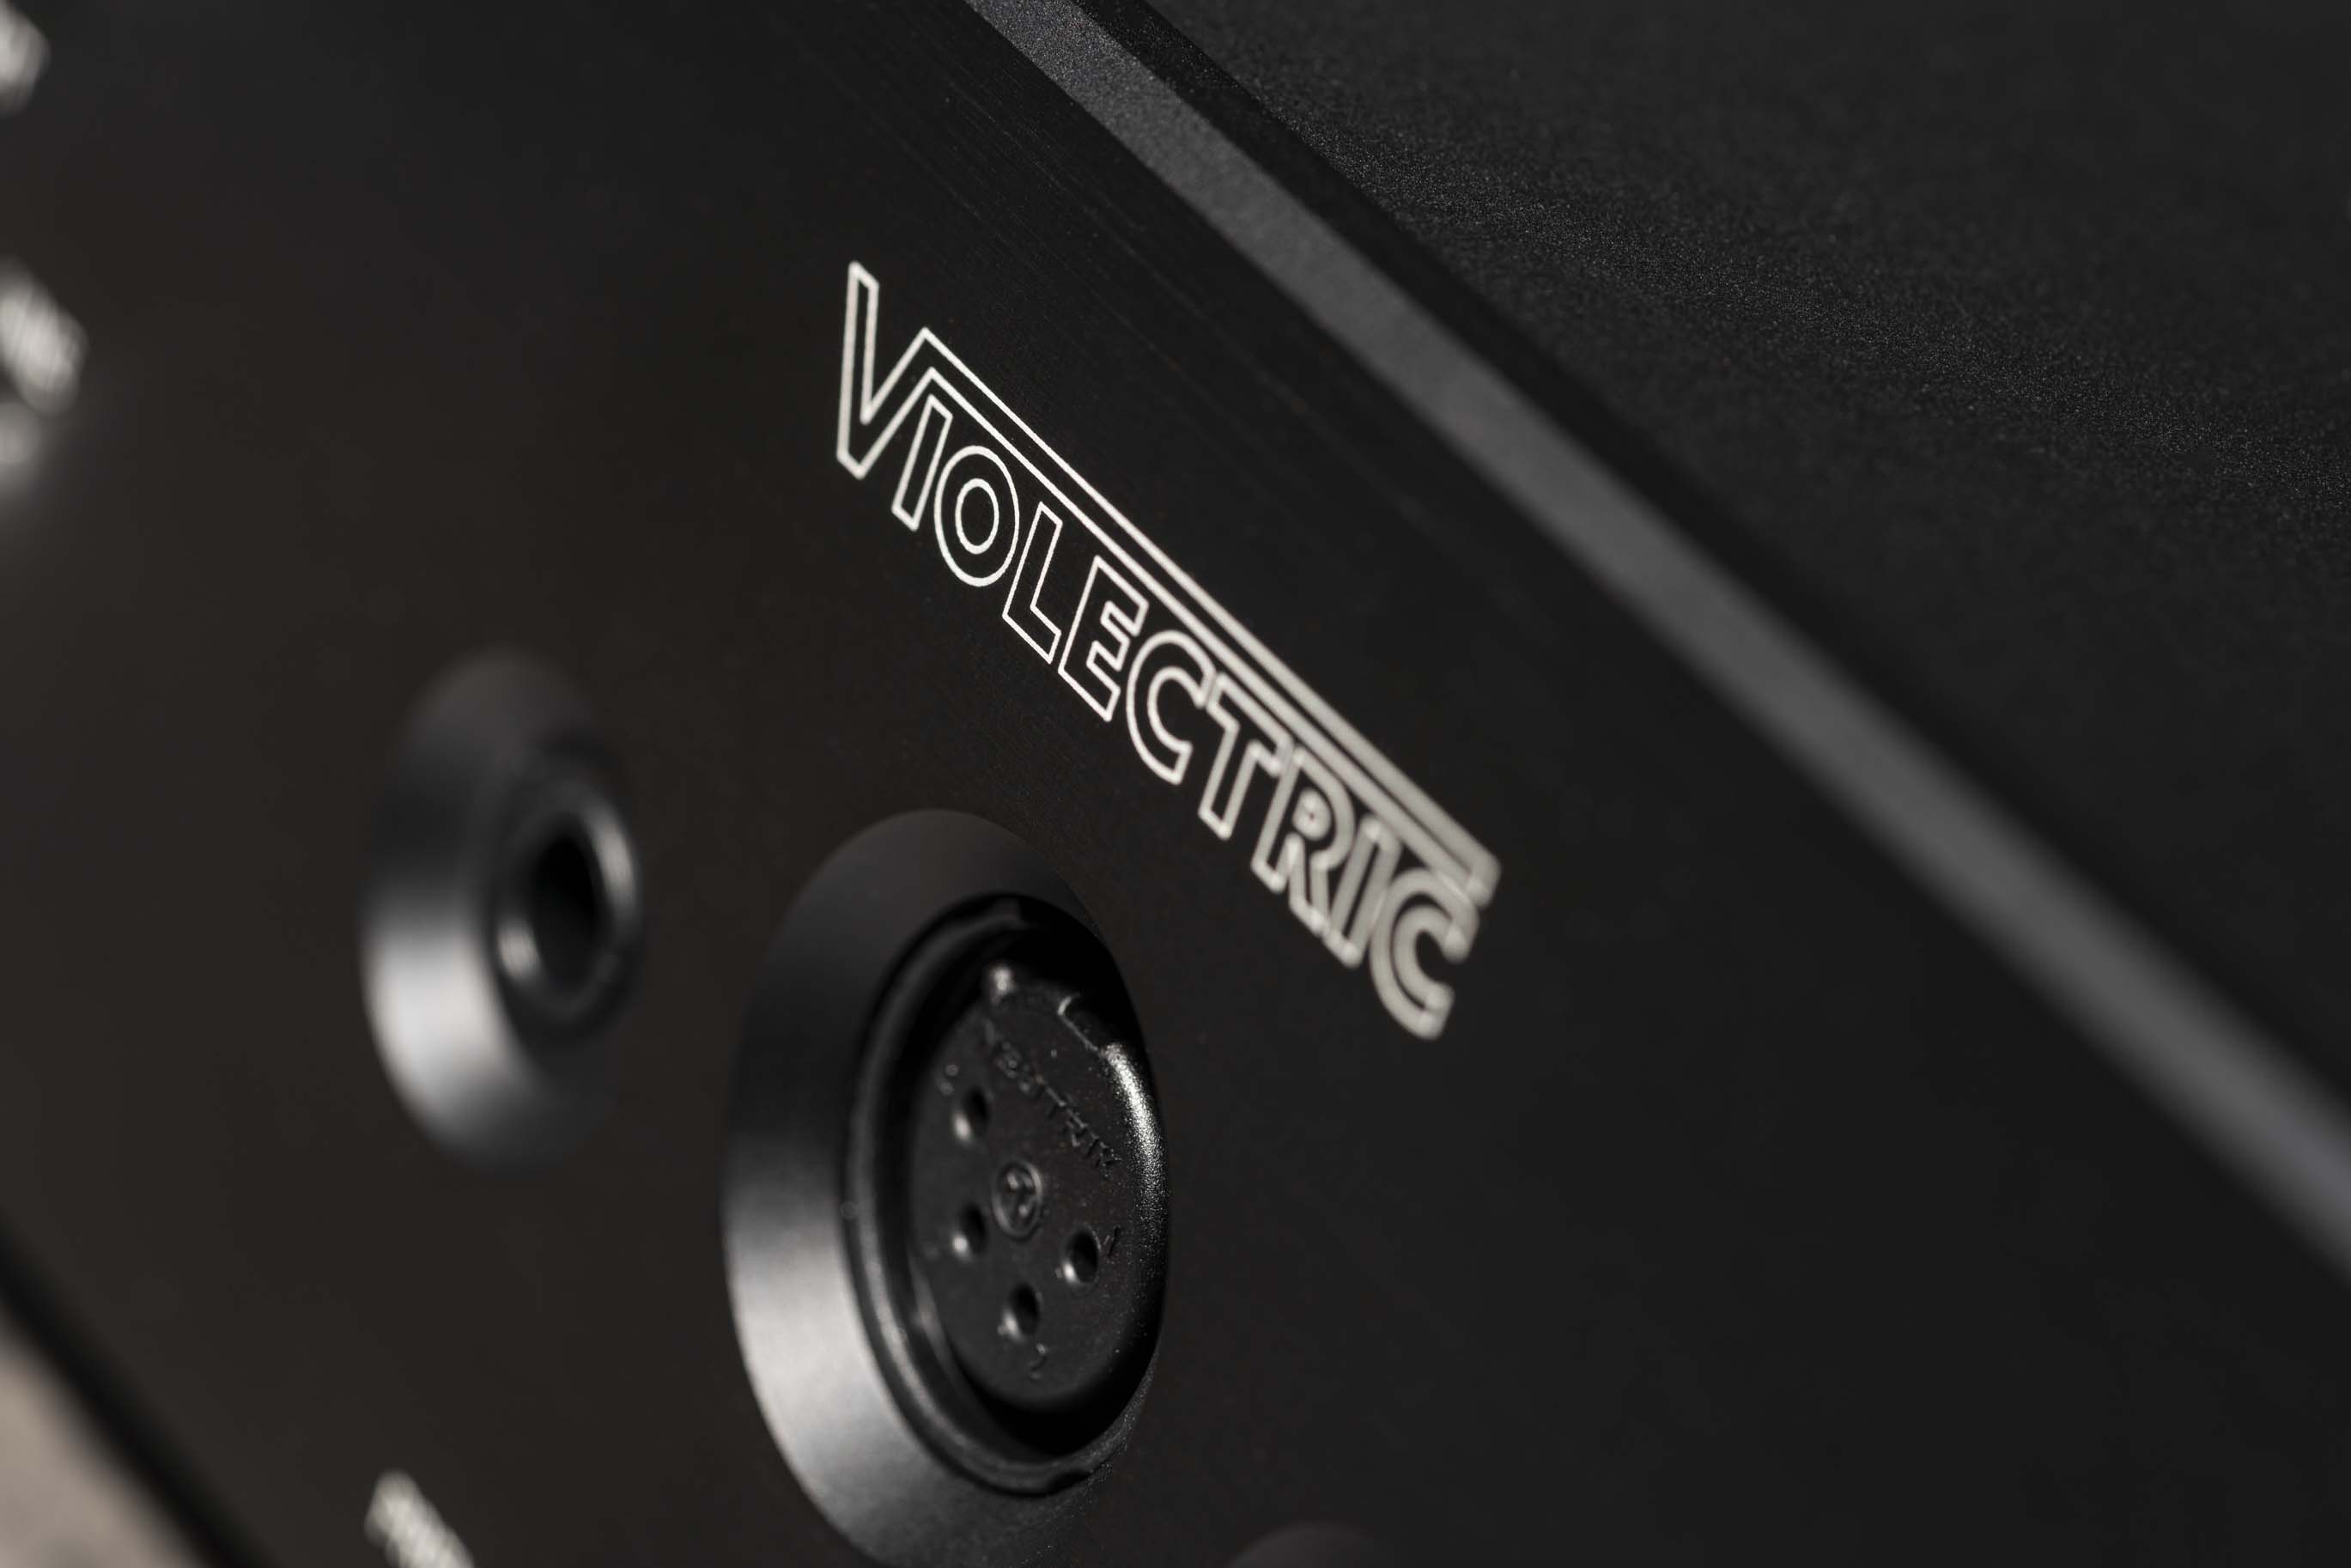 Violectric HPA V340